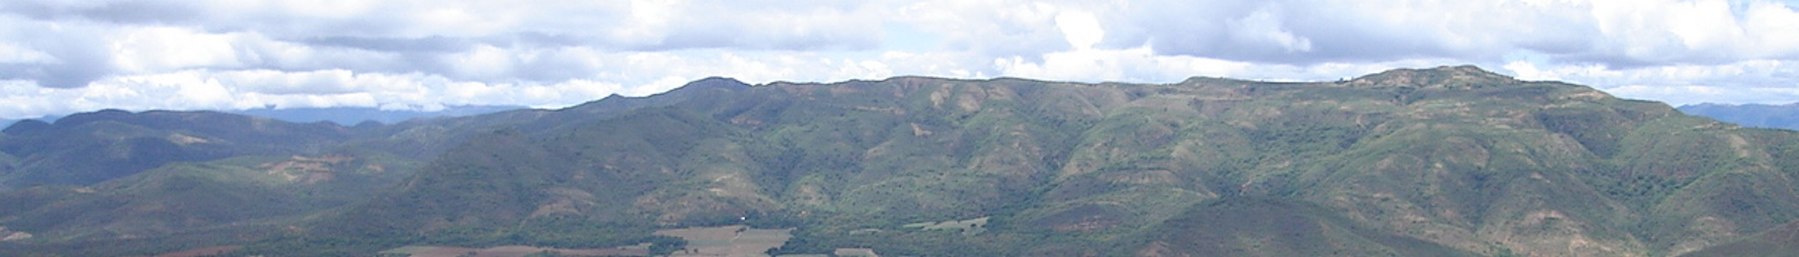 WV banner Tropical Lowlands Mountains boven Comarpa.jpg